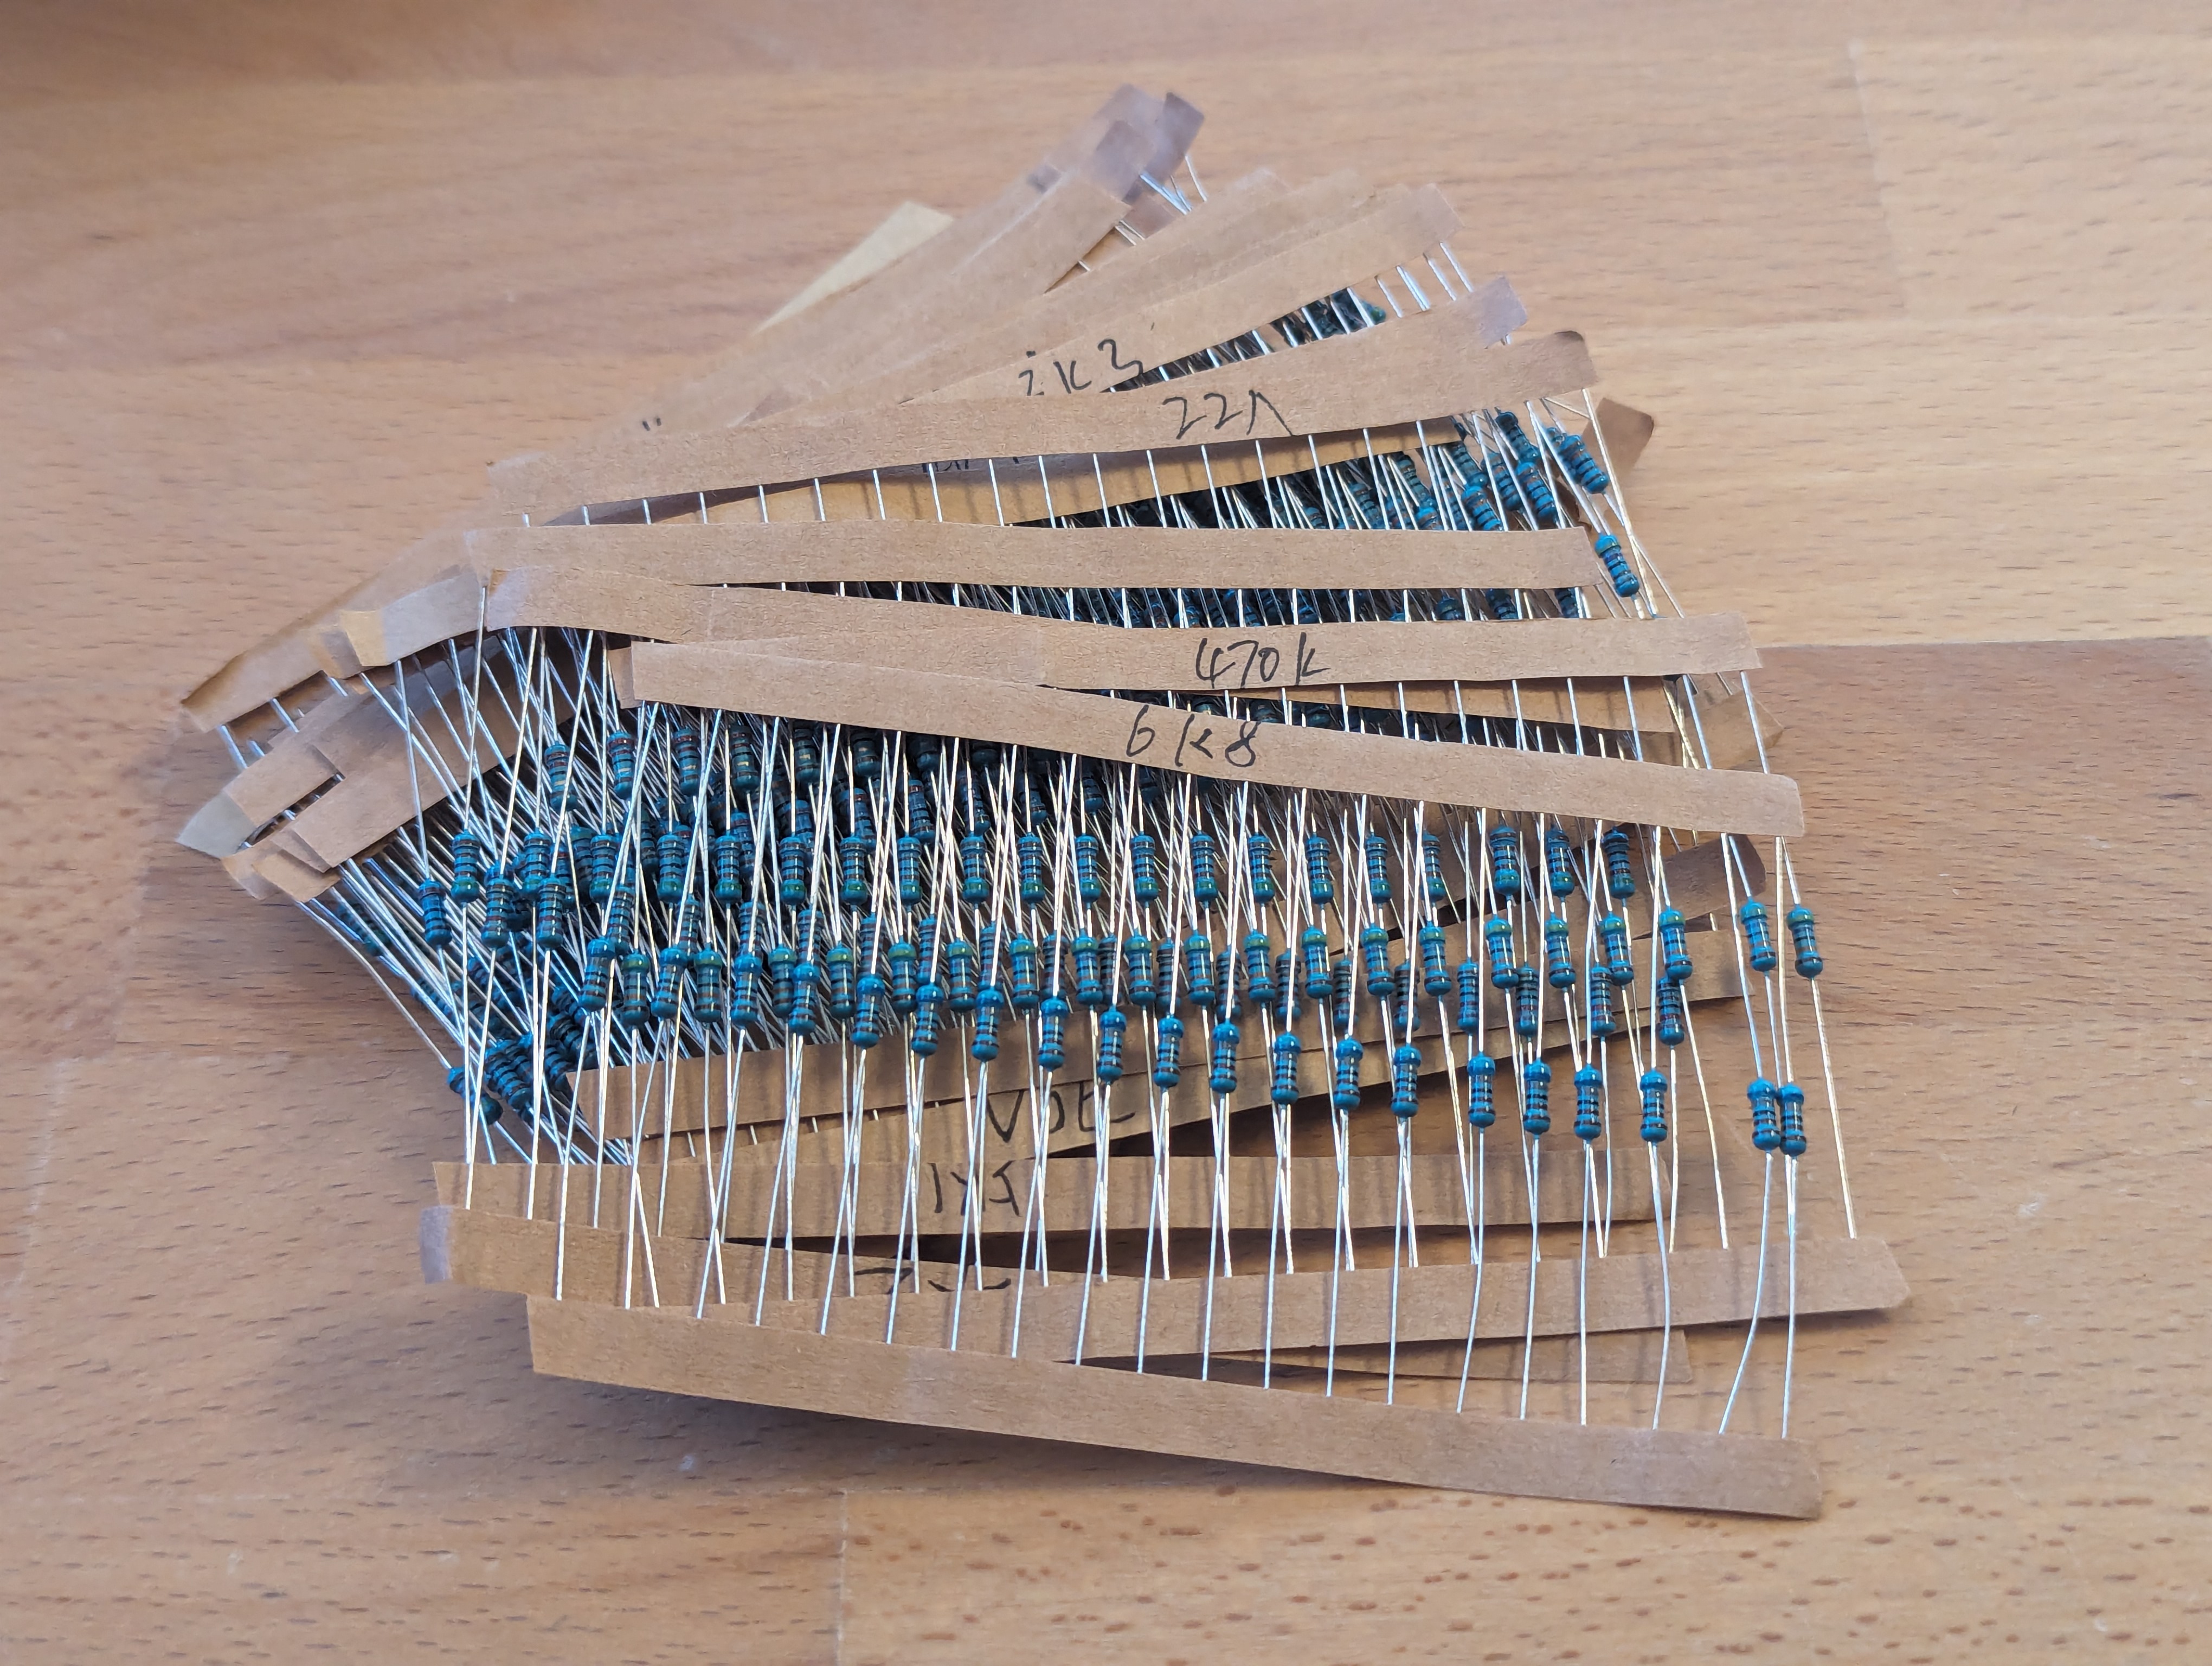 Resistor assortment 0.25W metal layer - 600 pieces with 30 different values